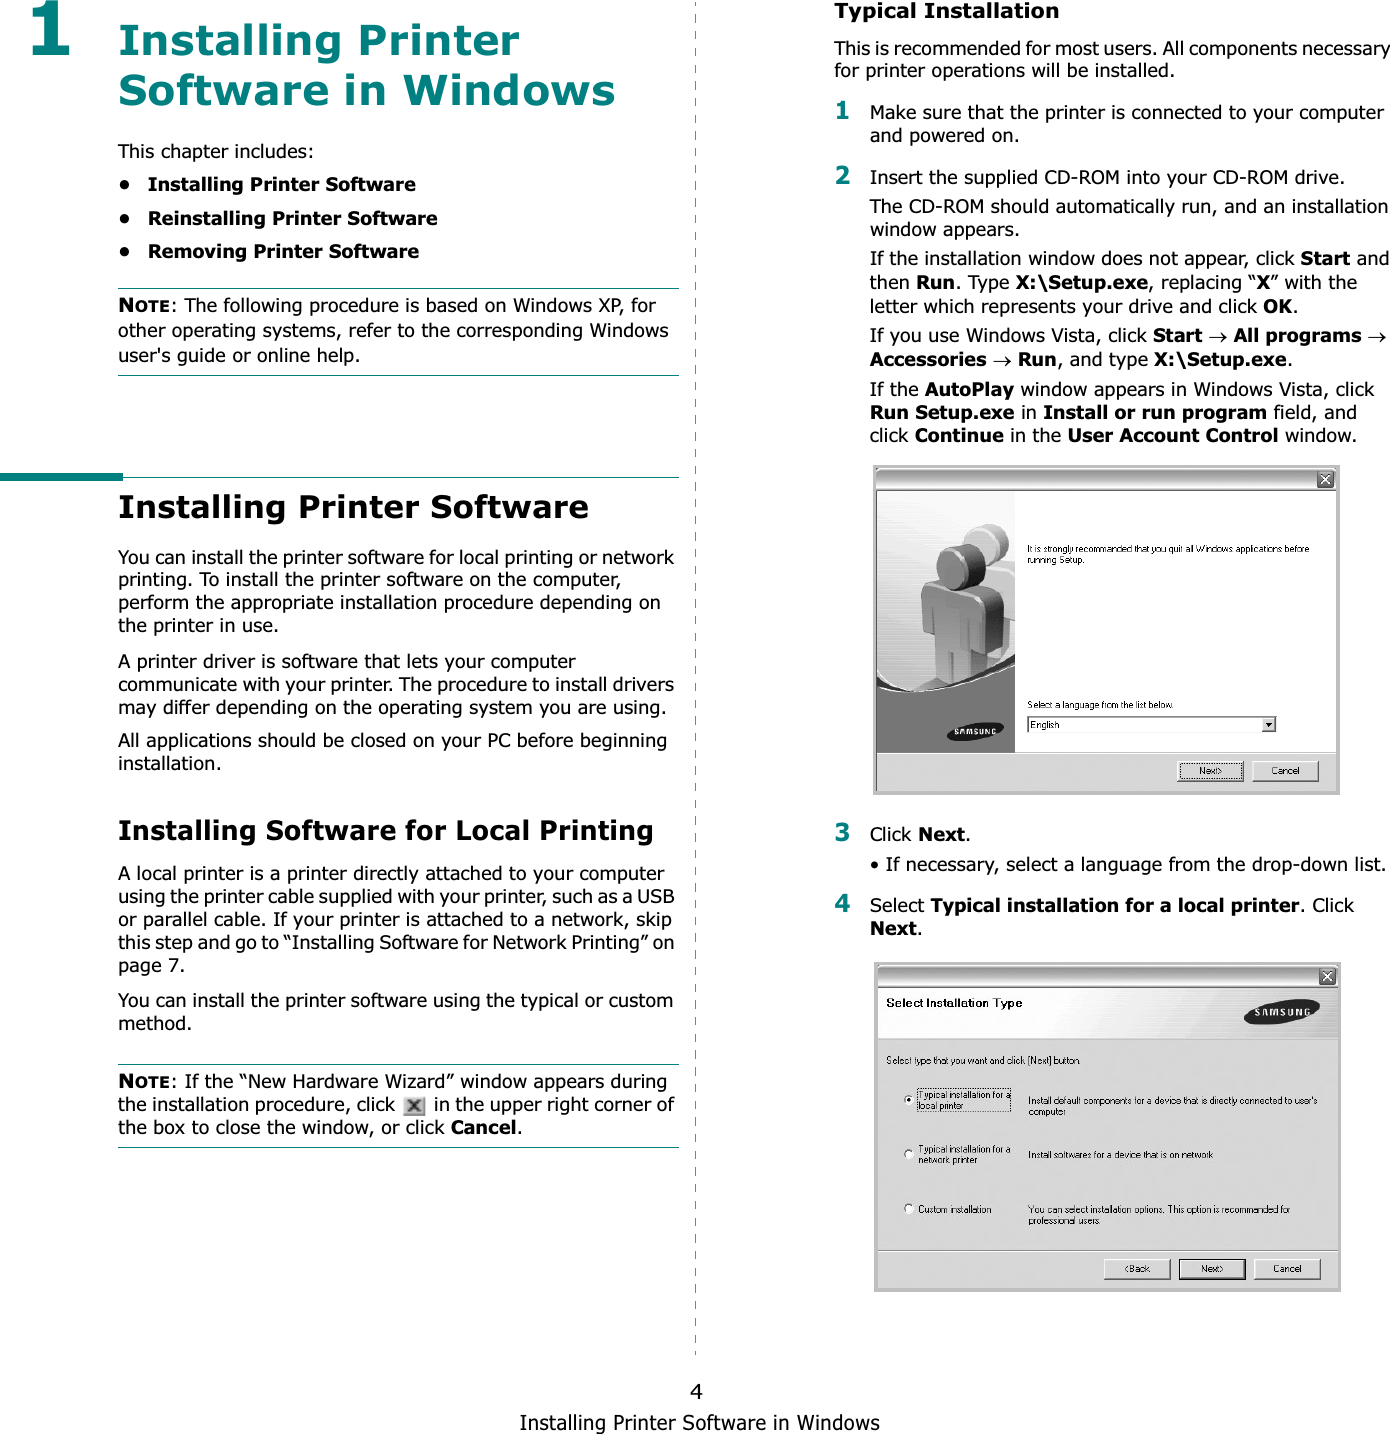 Installing Printer Software in Windows41Installing Printer Software in WindowsThis chapter includes:• Installing Printer Software• Reinstalling Printer Software• Removing Printer SoftwareNOTE: The following procedure is based on Windows XP, for other operating systems, refer to the corresponding Windows user&apos;s guide or online help.Installing Printer SoftwareYou can install the printer software for local printing or network printing. To install the printer software on the computer, perform the appropriate installation procedure depending on the printer in use.A printer driver is software that lets your computer communicate with your printer. The procedure to install drivers may differ depending on the operating system you are using.All applications should be closed on your PC before beginning installation. Installing Software for Local PrintingA local printer is a printer directly attached to your computer using the printer cable supplied with your printer, such as a USB or parallel cable. If your printer is attached to a network, skip this step and go to “Installing Software for Network Printing” on page 7.You can install the printer software using the typical or custom method.NOTE: If the “New Hardware Wizard” window appears during the installation procedure, click   in the upper right corner of the box to close the window, or click Cancel.Typical InstallationThis is recommended for most users. All components necessary for printer operations will be installed.1Make sure that the printer is connected to your computer and powered on.2Insert the supplied CD-ROM into your CD-ROM drive.The CD-ROM should automatically run, and an installation window appears.If the installation window does not appear, click Start and then Run. Type X:\Setup.exe, replacing “X” with the letter which represents your drive and click OK.If you use Windows Vista, click StartoAll programsoAccessoriesoRun, and type X:\Setup.exe.If the AutoPlay window appears in Windows Vista, click Run Setup.exe in Install or run program field, and click Continue in the User Account Control window.3Click Next.• If necessary, select a language from the drop-down list.4Select Typical installation for a local printer. Click Next.